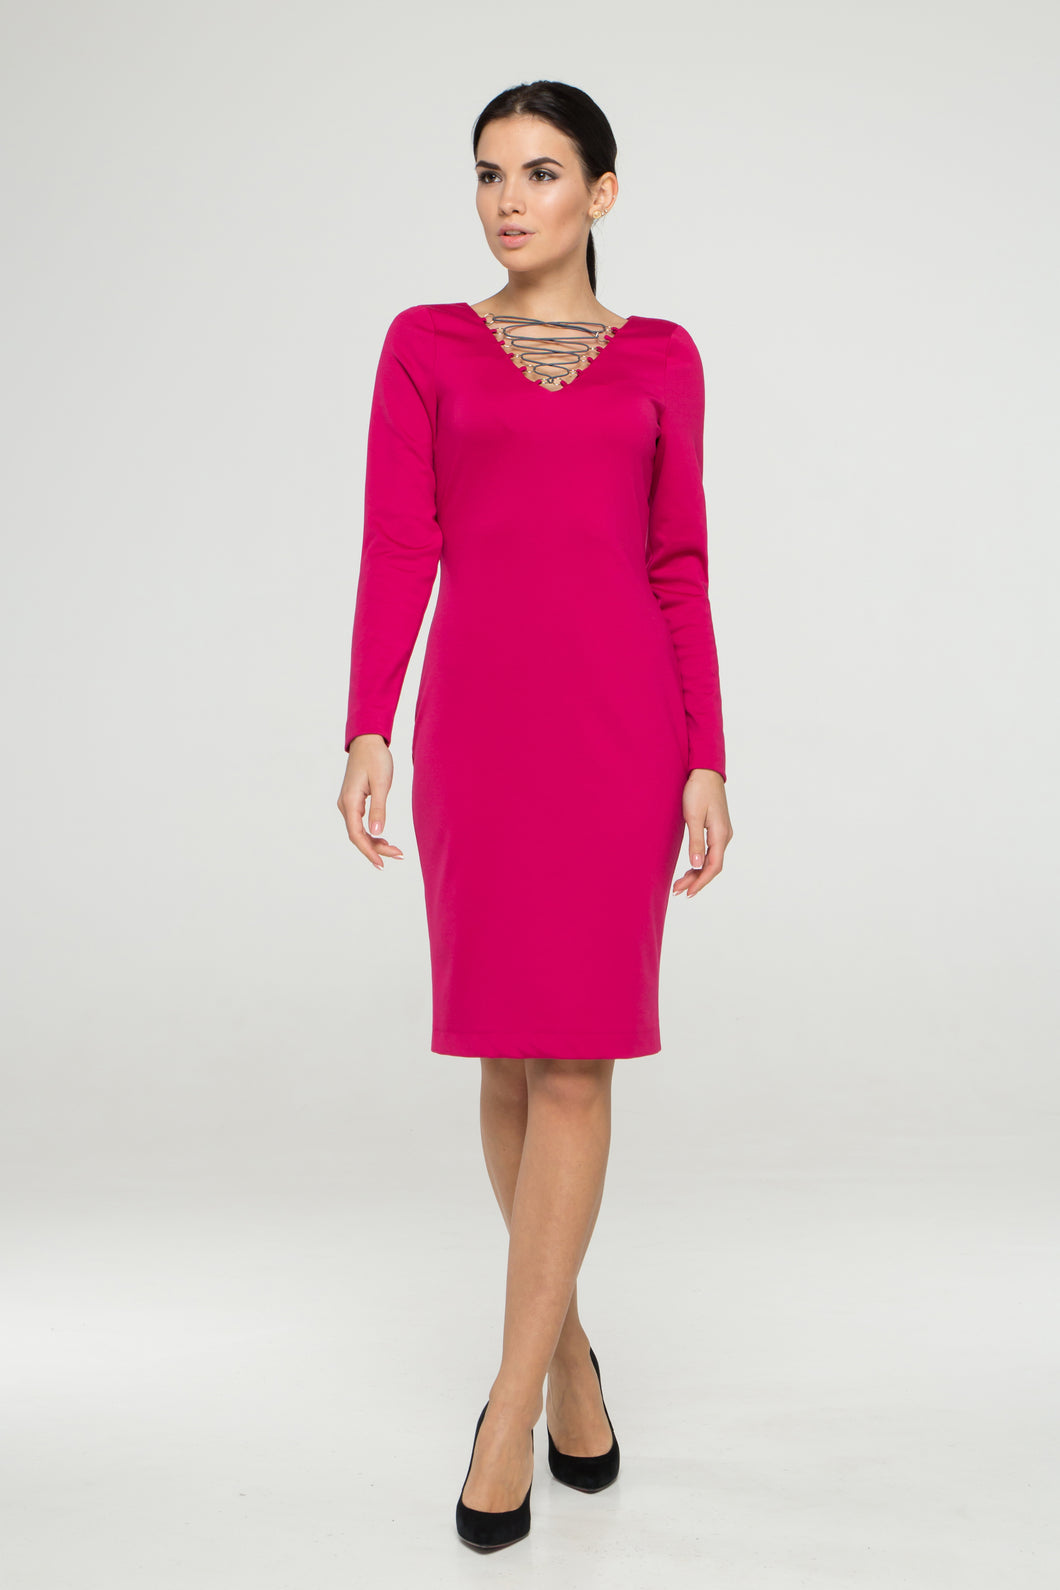 Pink lace-up jersey bodycon dress